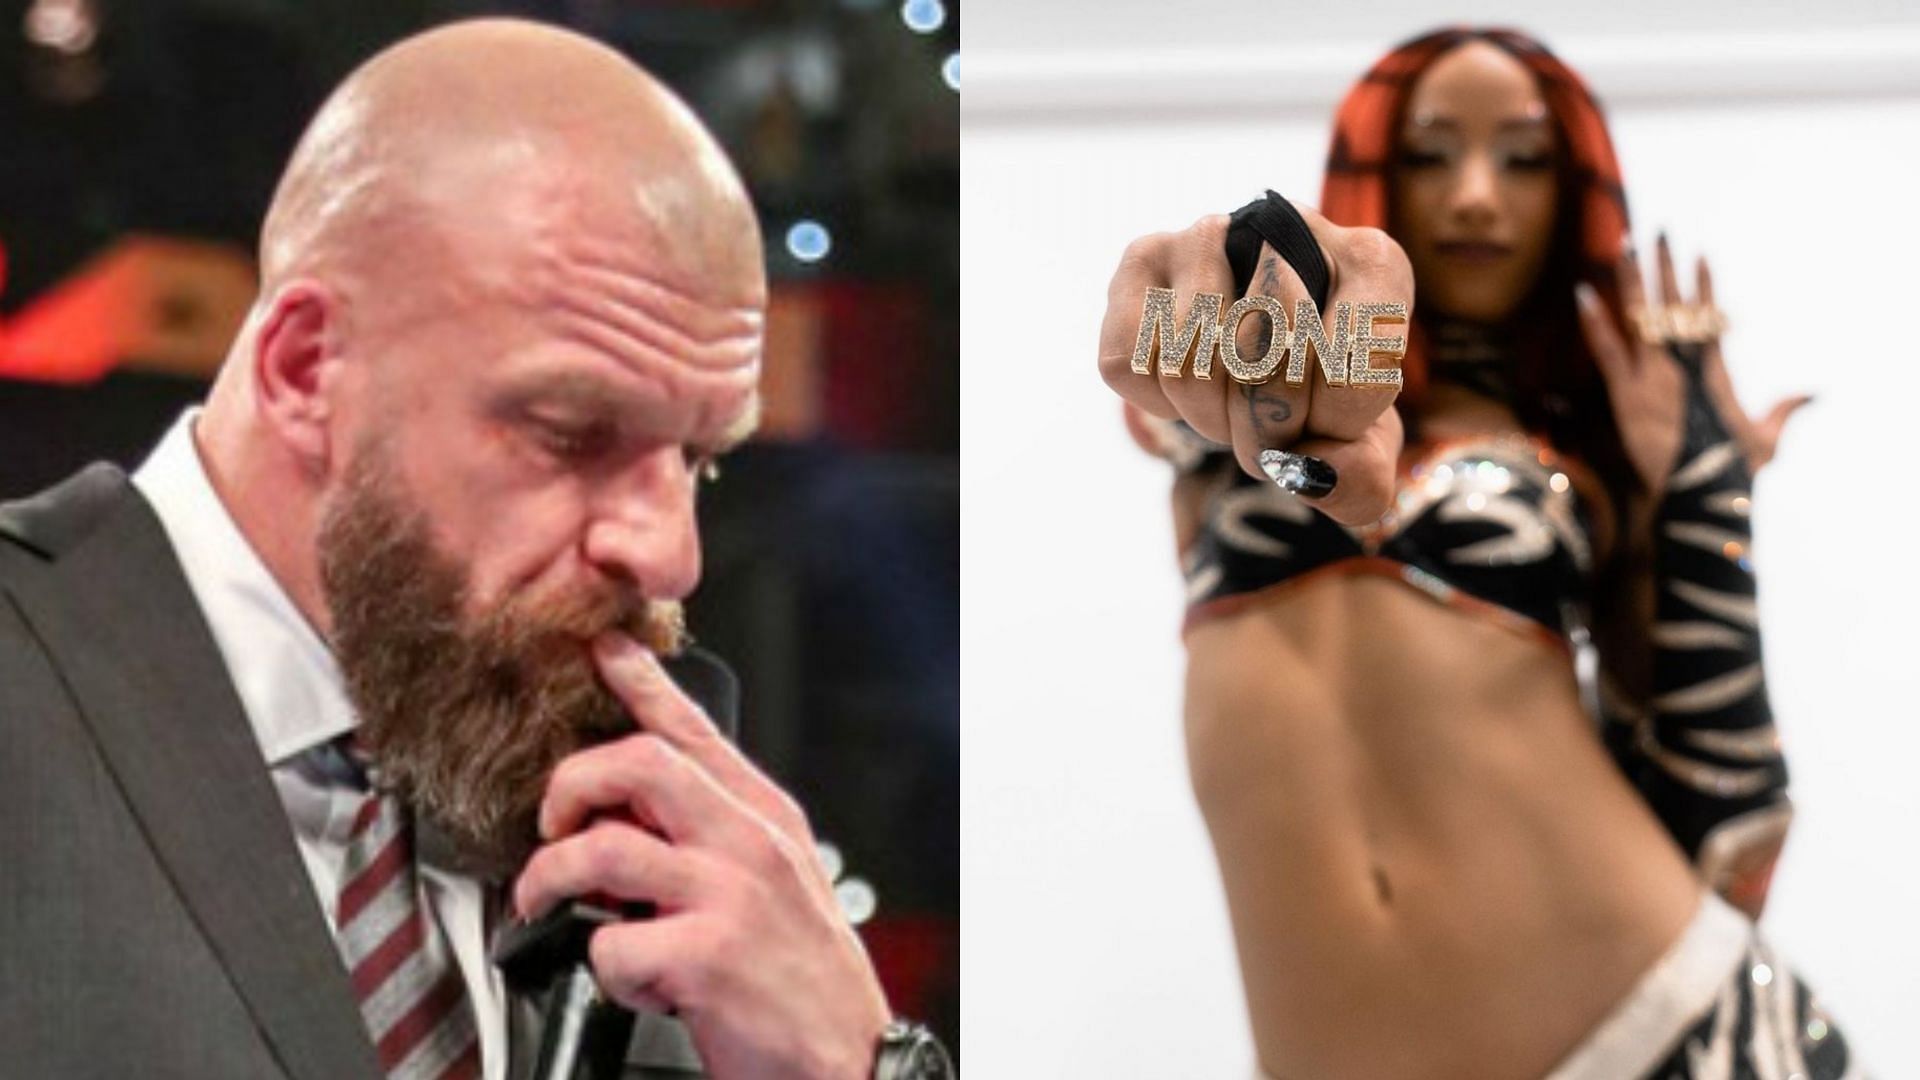 WWE Chief Content Officer Triple H (left) and Mercedes Mone (right)